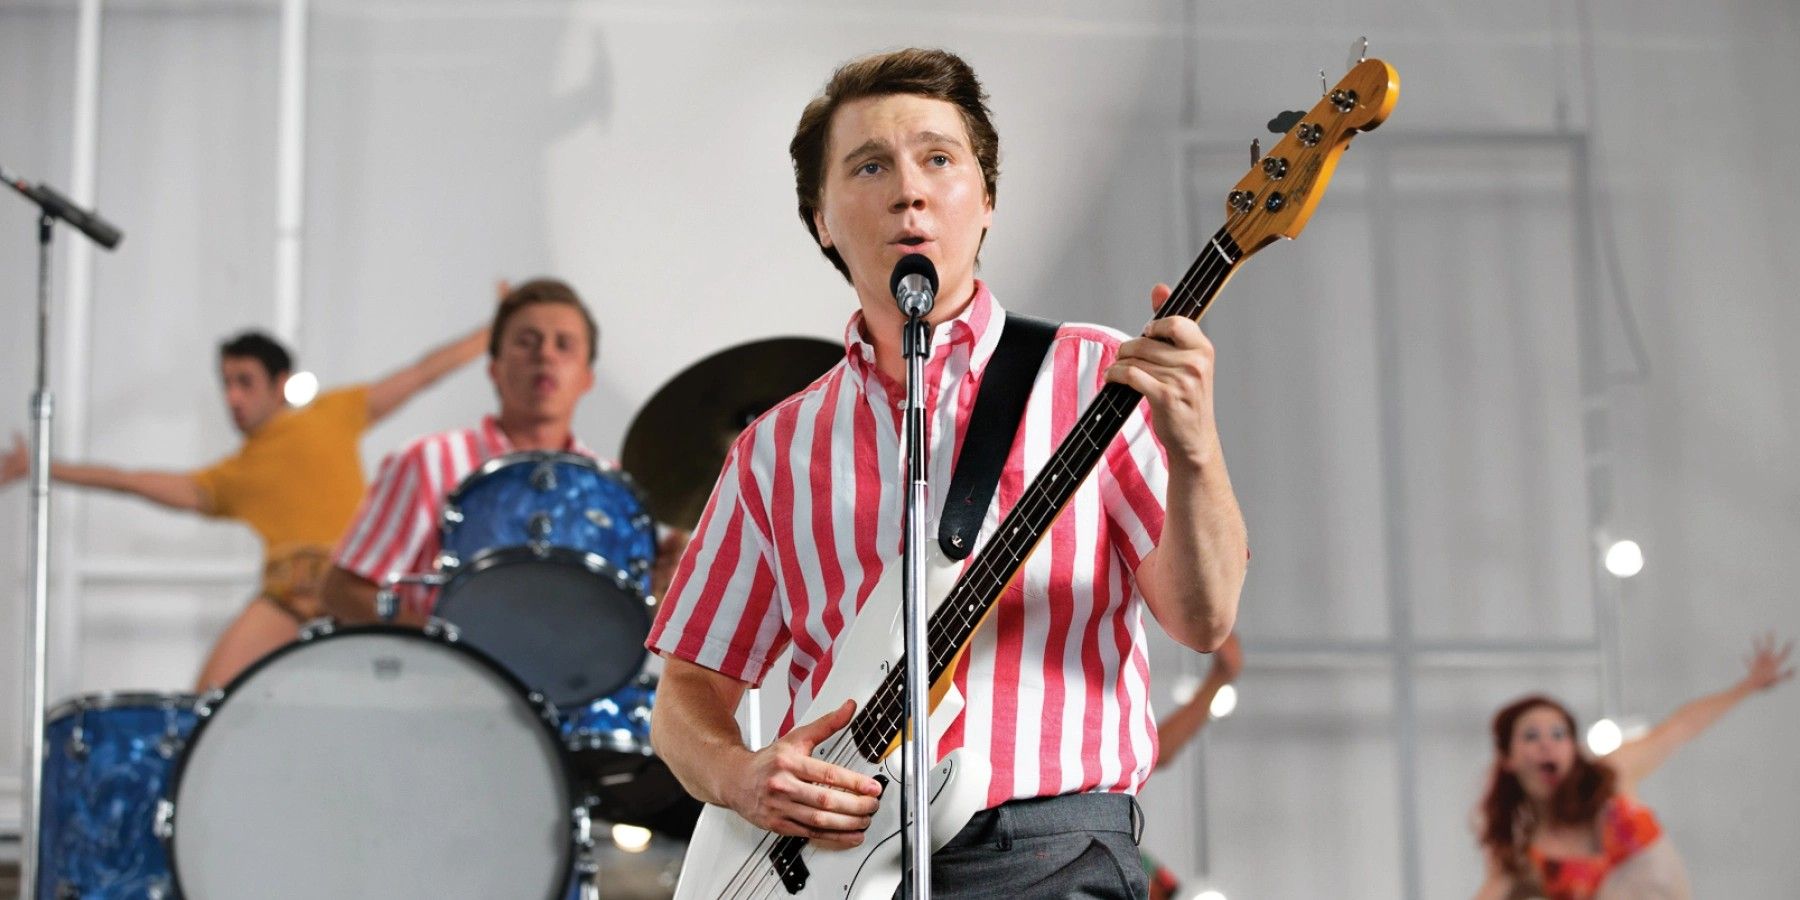 Paul Dano as Brian Wilson in Love and Mercy